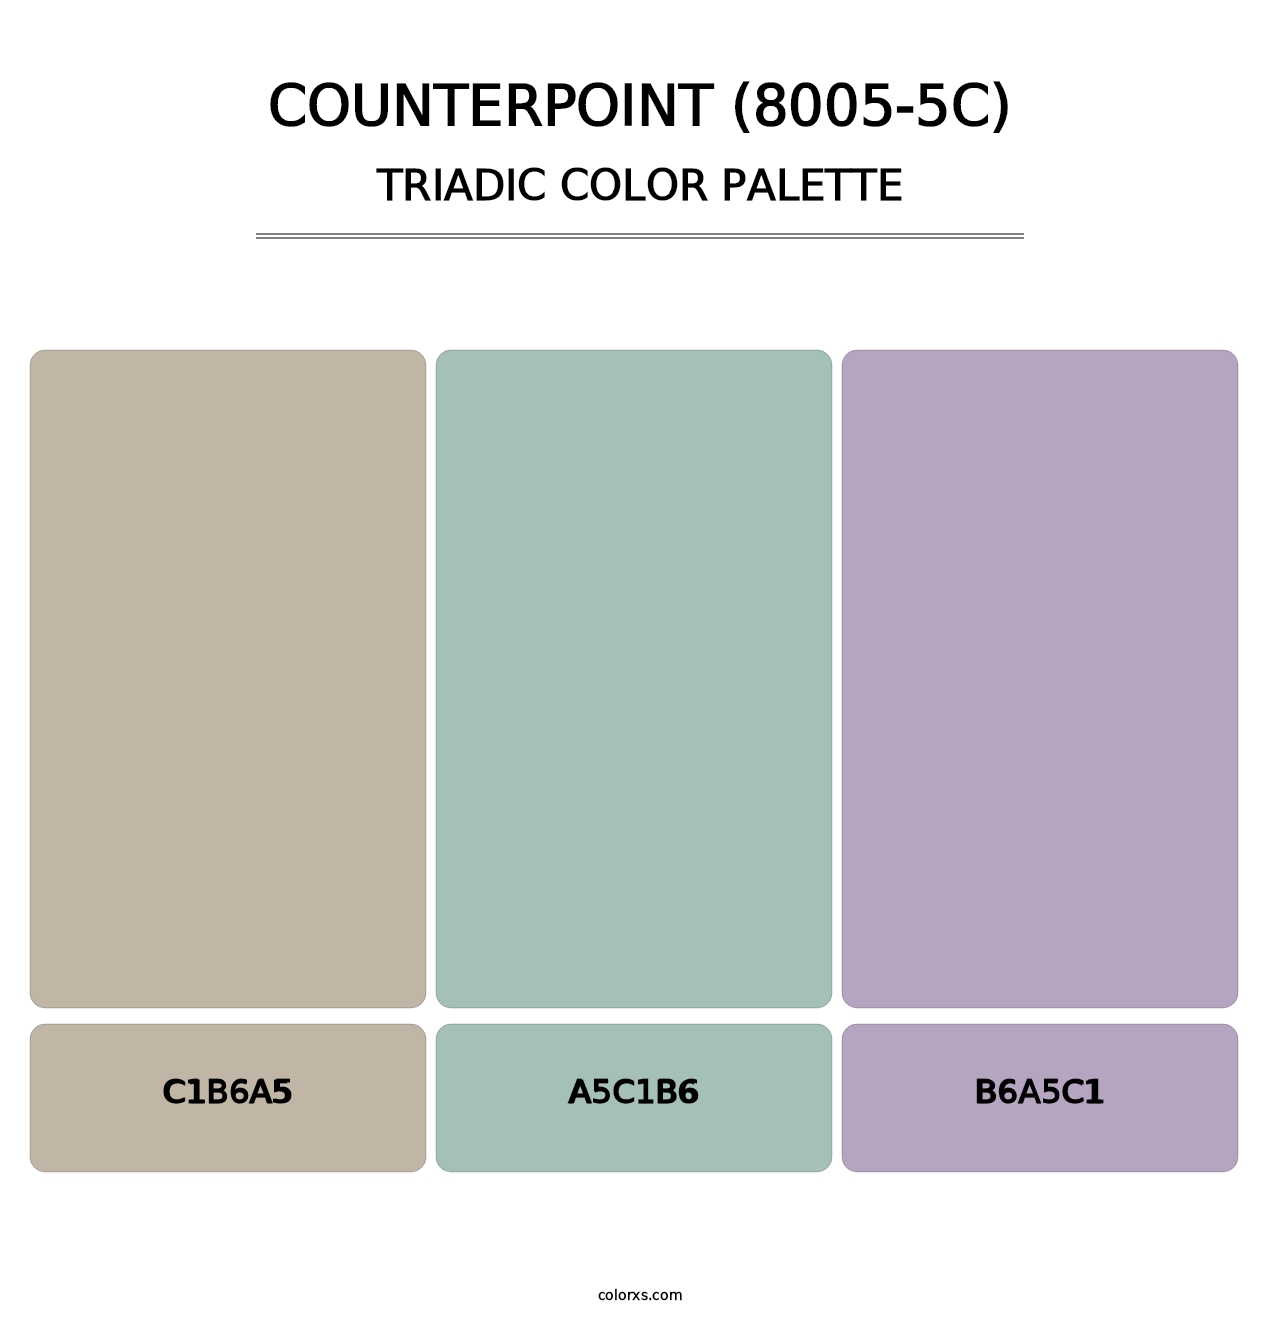 Counterpoint (8005-5C) - Triadic Color Palette